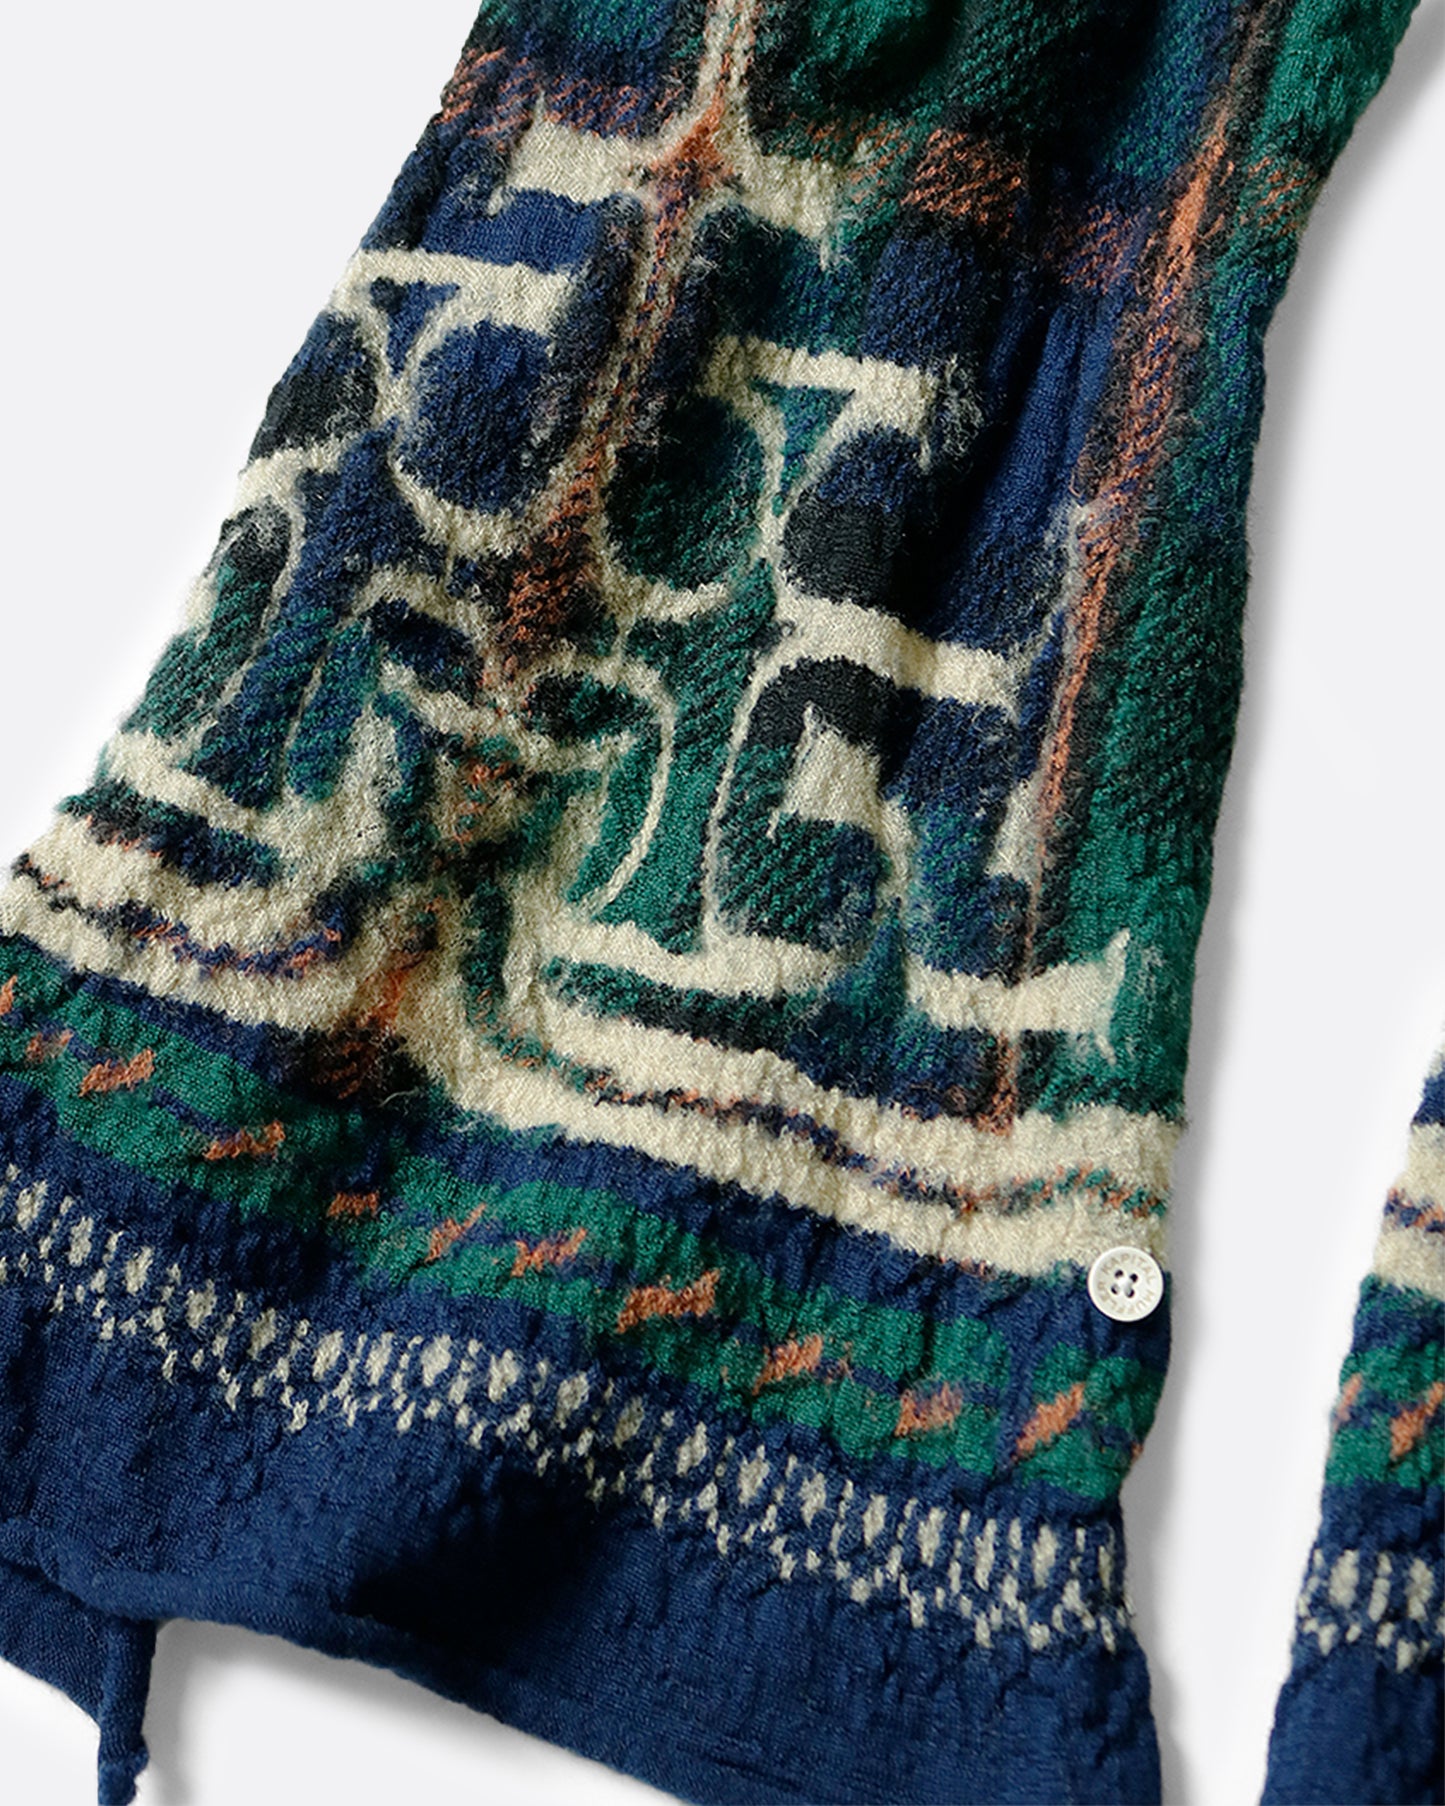 This scarf combines traditional Scottish tartan and Japanese Ainu patterns.